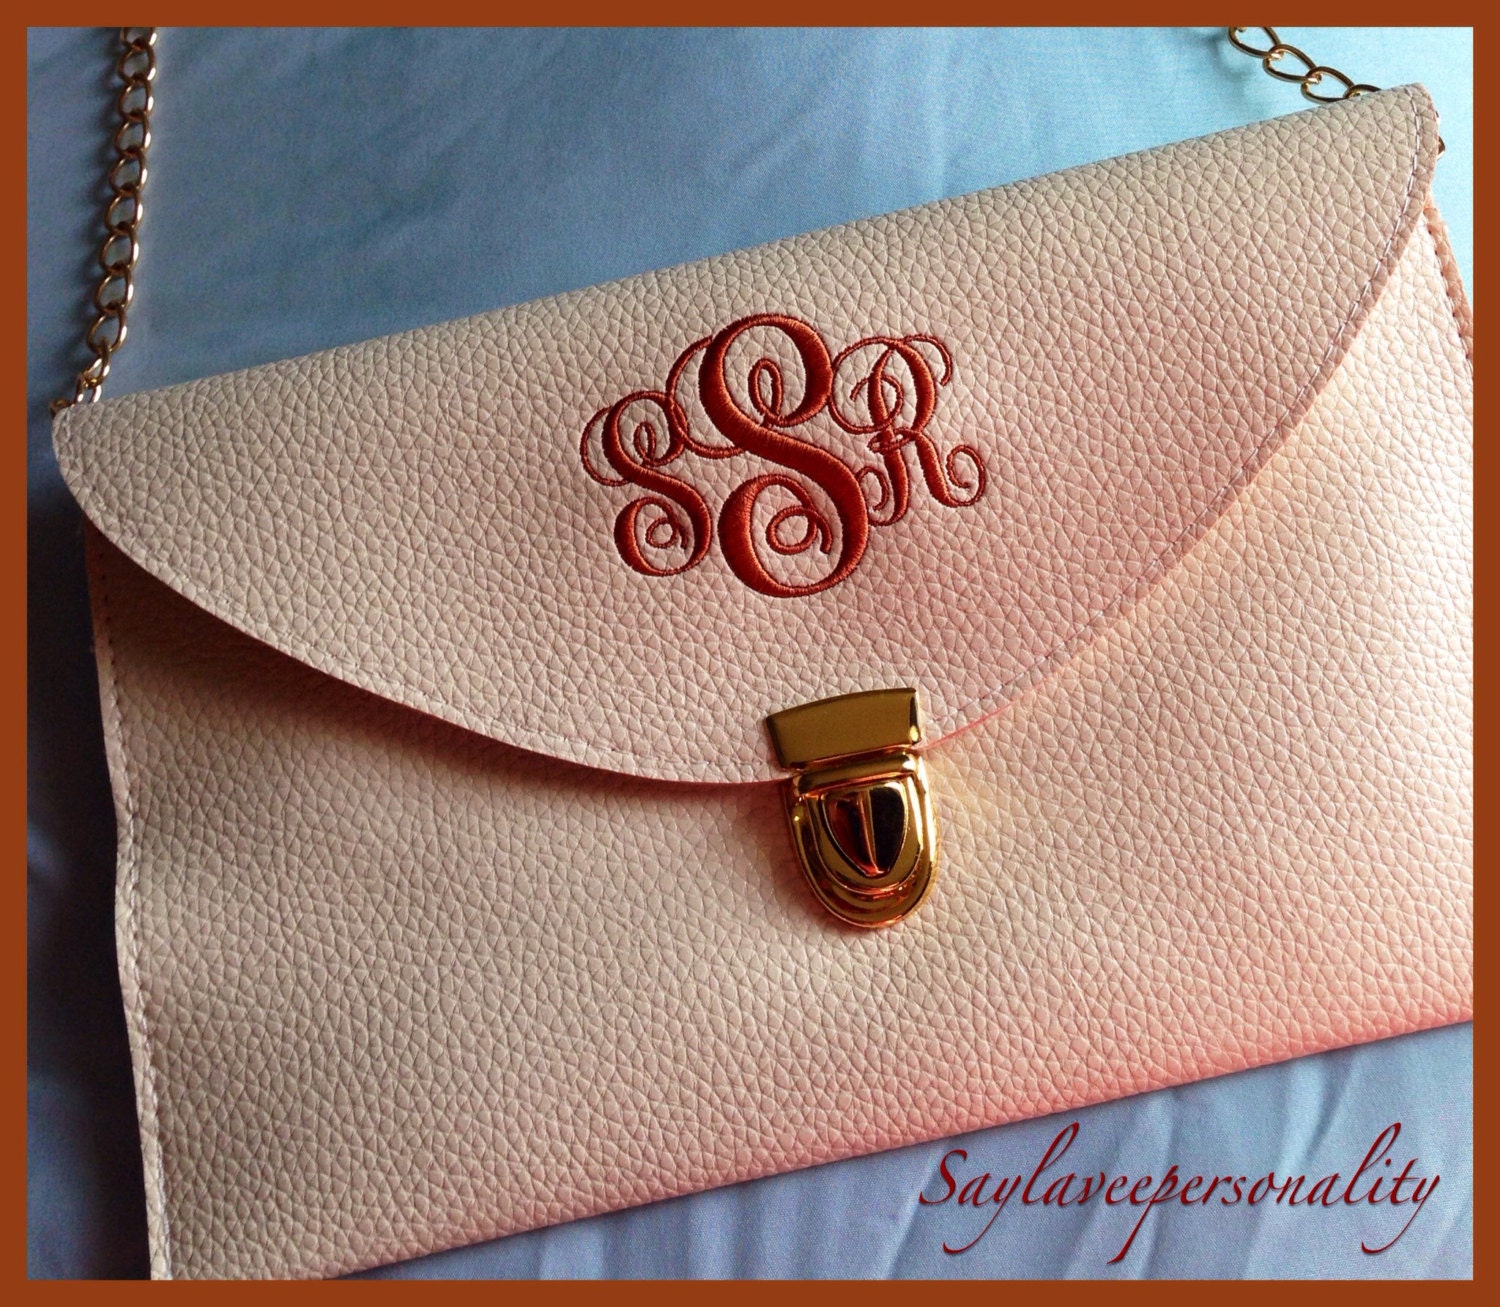 Monogrammed leather clutch purse with custom initials